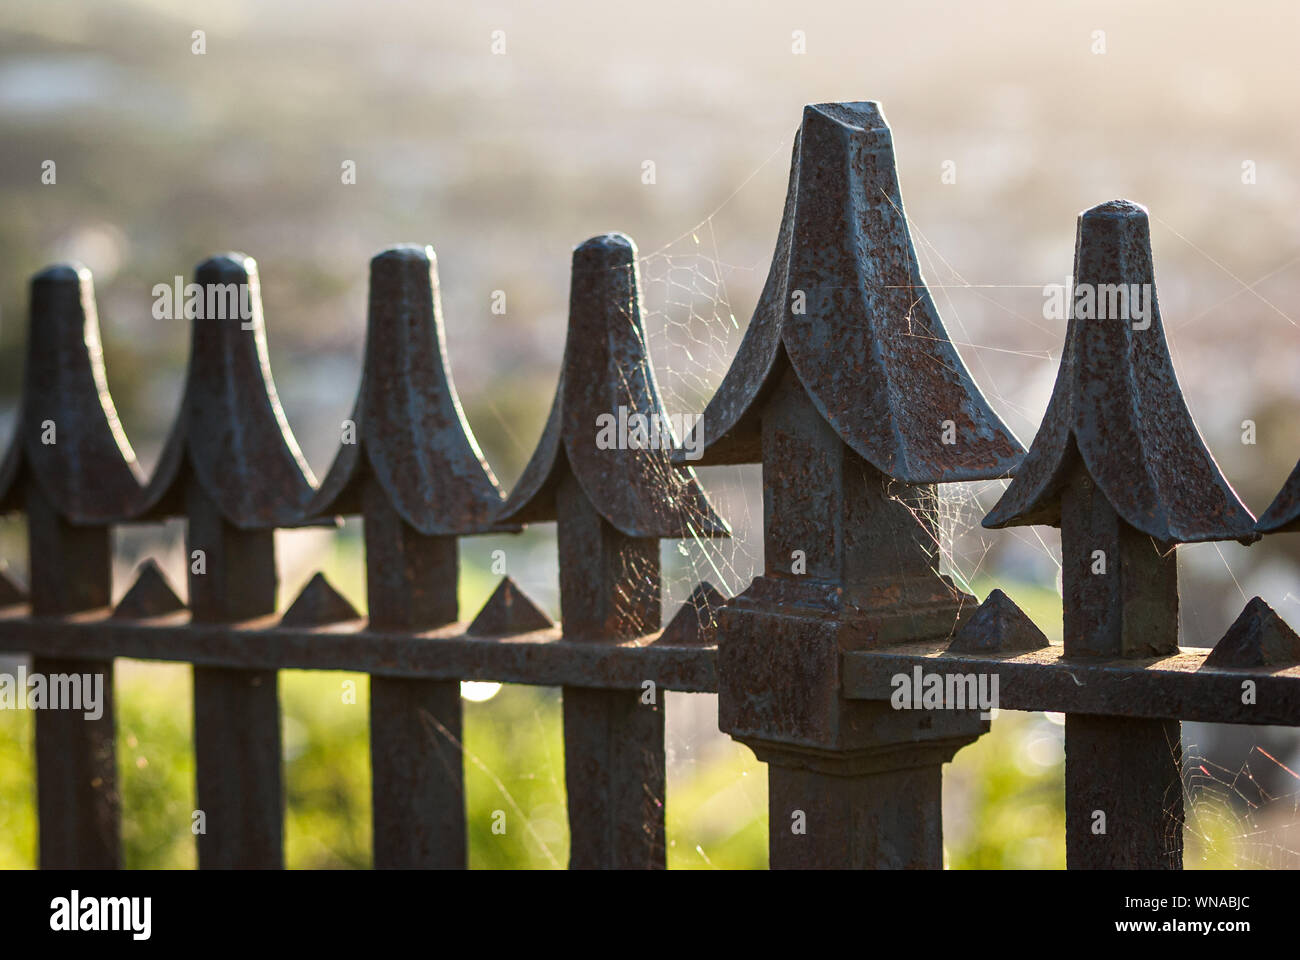 Rusty iron railings covered in cobwebs lit by contre-jour lighting Stock Photo